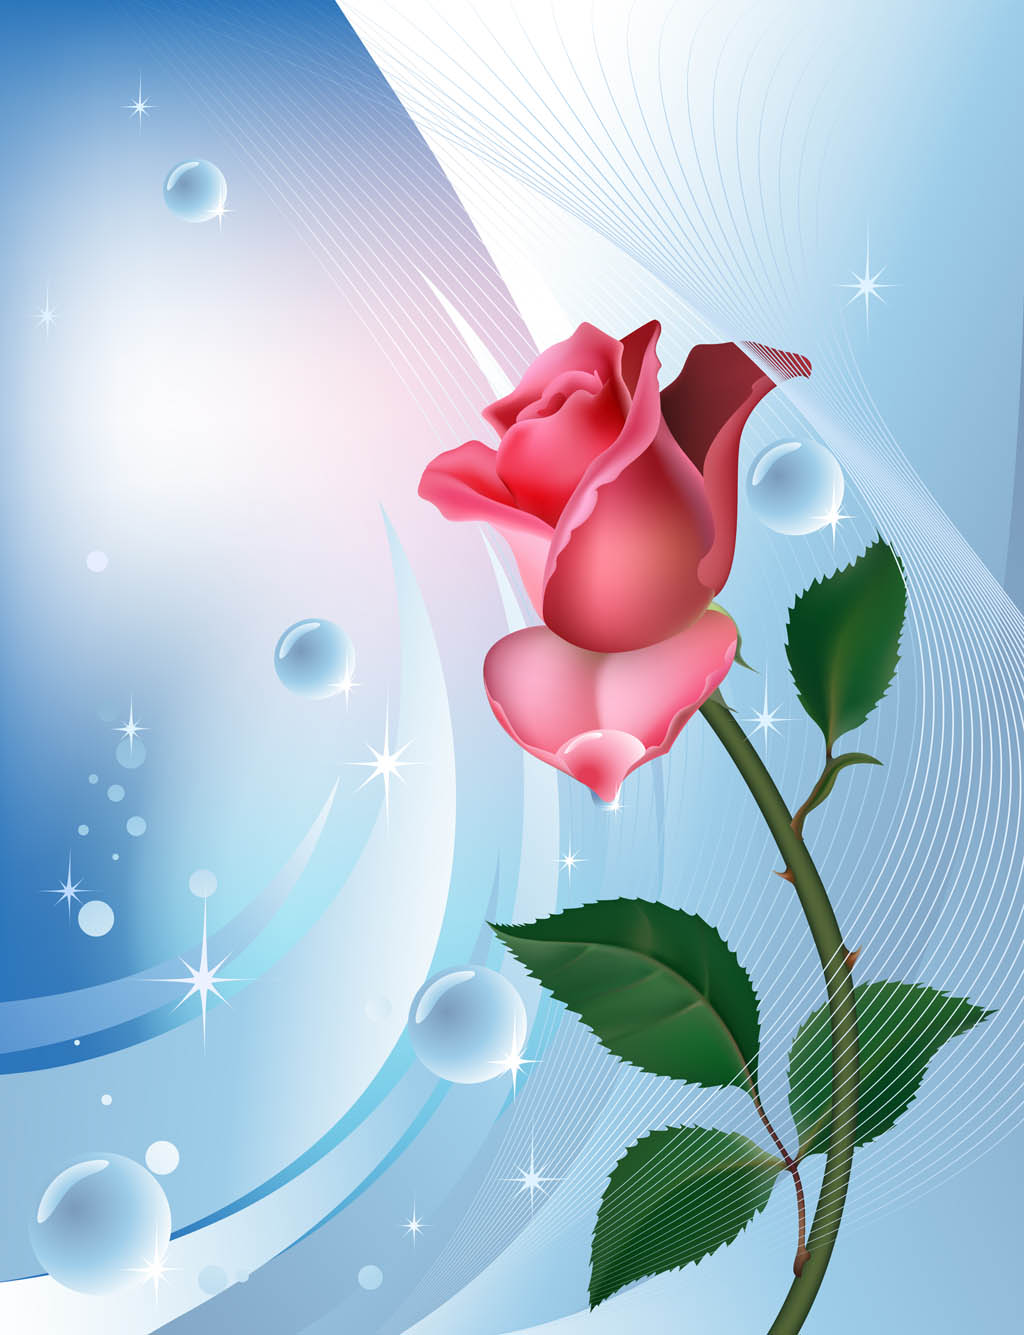 Rose Background Template Vector Art & Graphics 